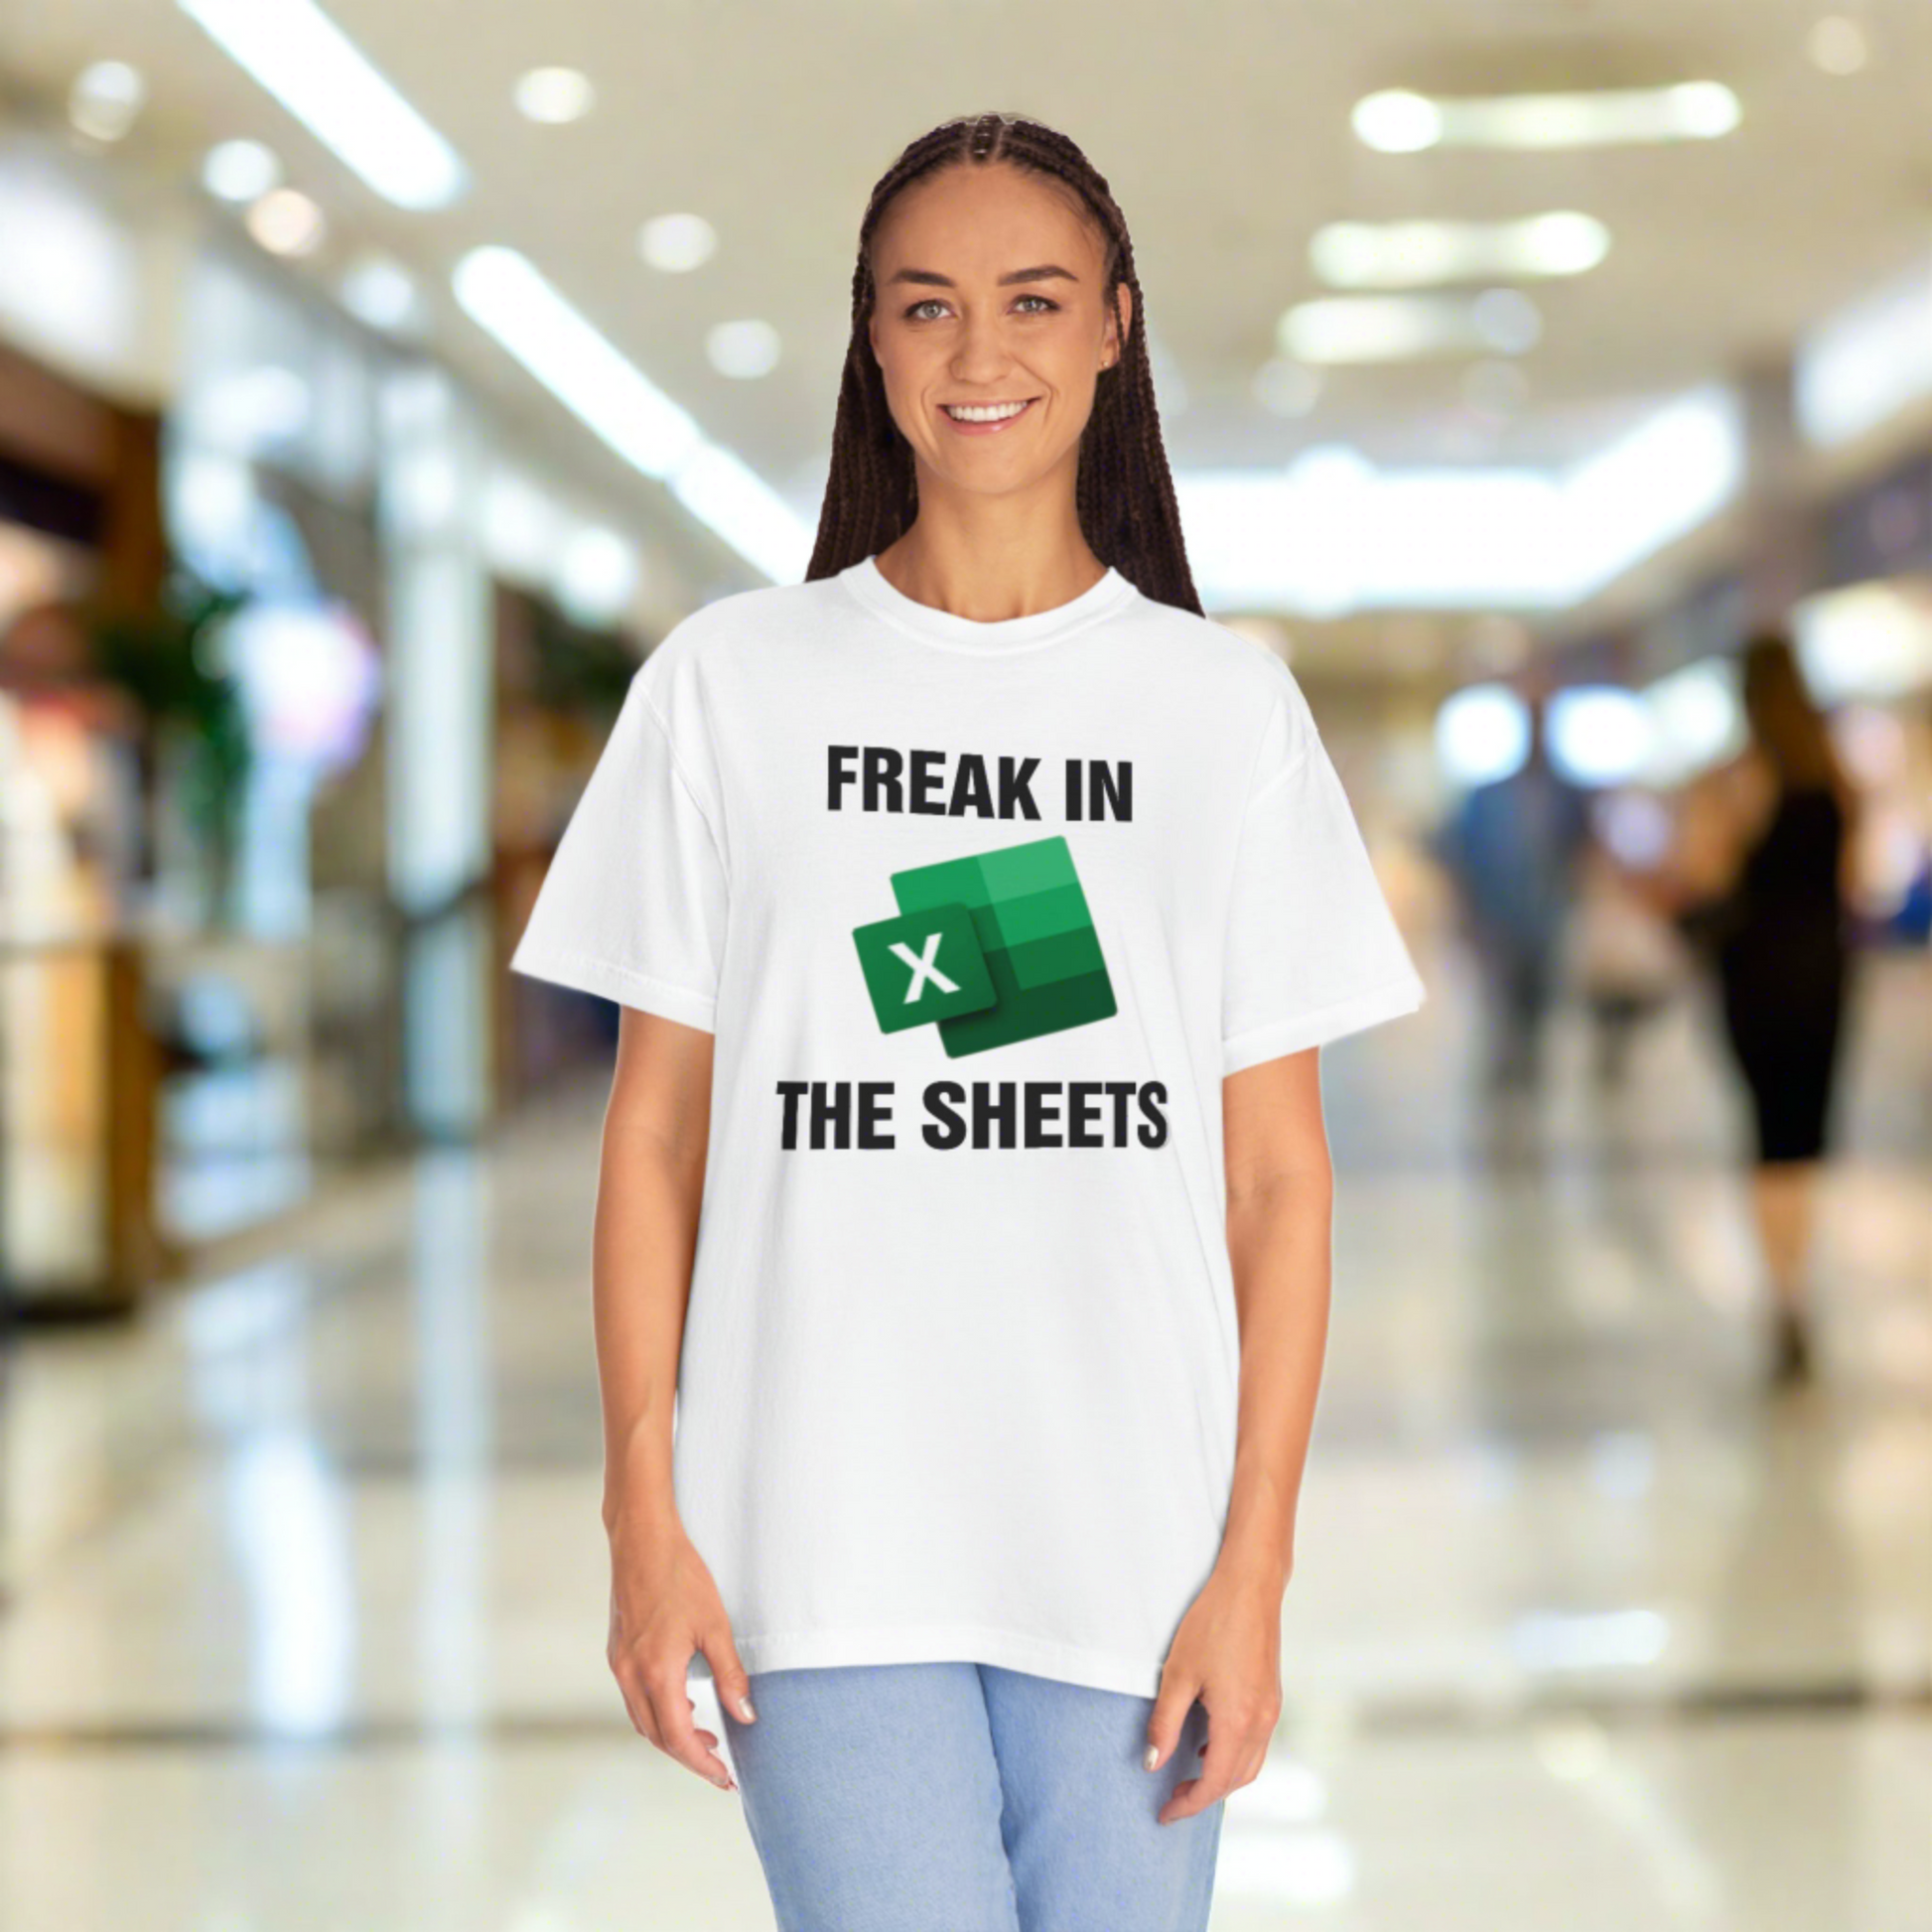 Freak in the Sheets - Cotton T-Shirt - Wood Unlimited#